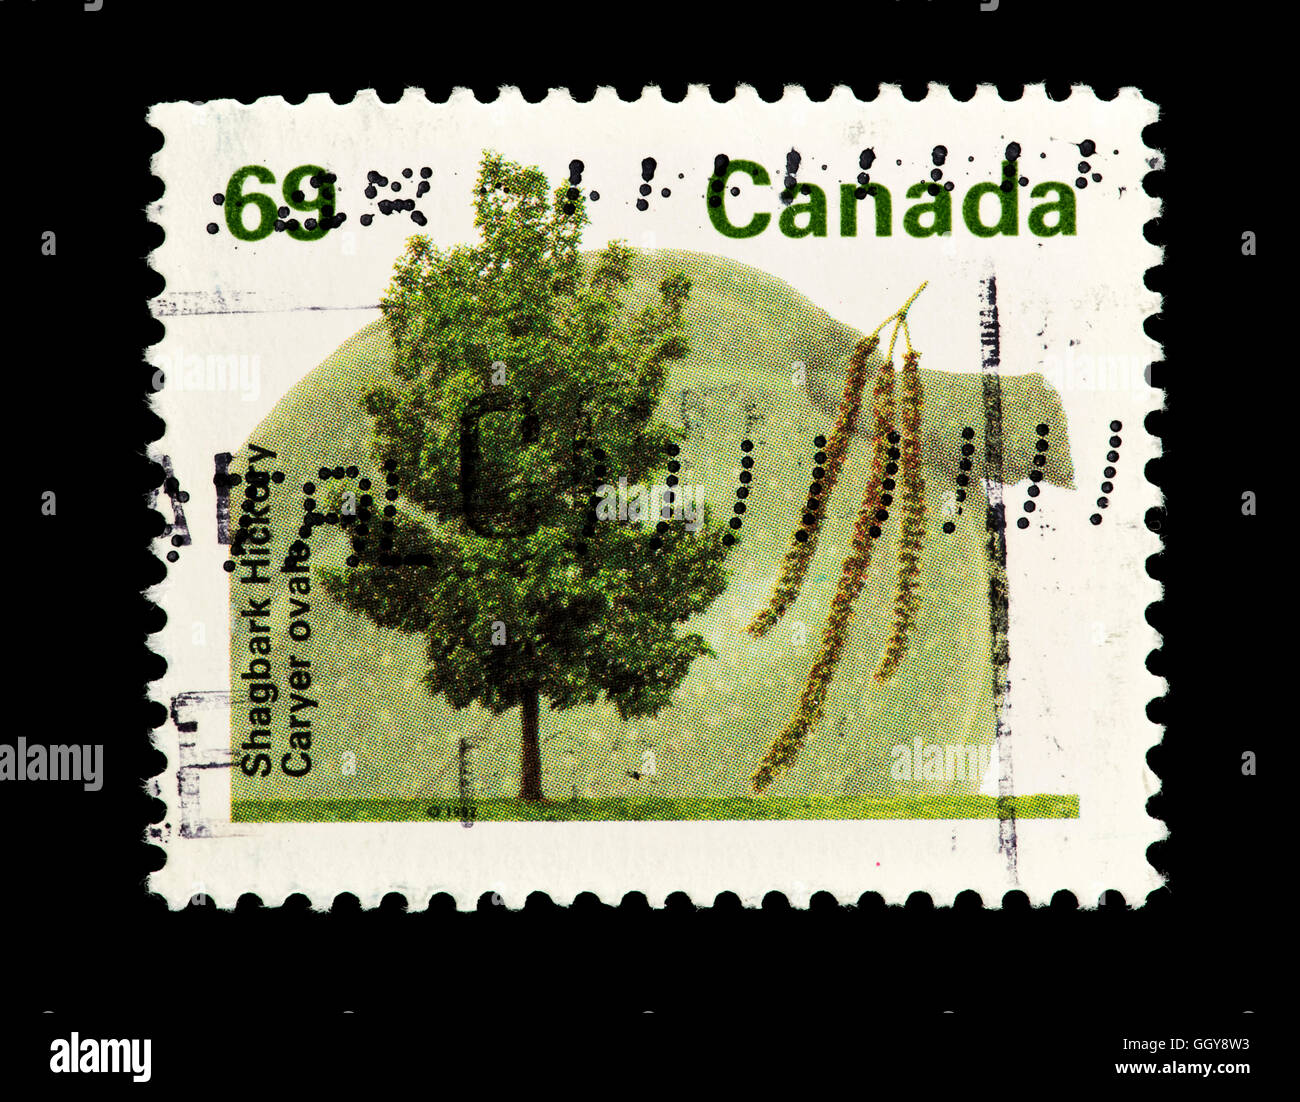 Postage stamp from Canada depicting  shagbark hickory trees and seeds (Carya ovata) Stock Photo